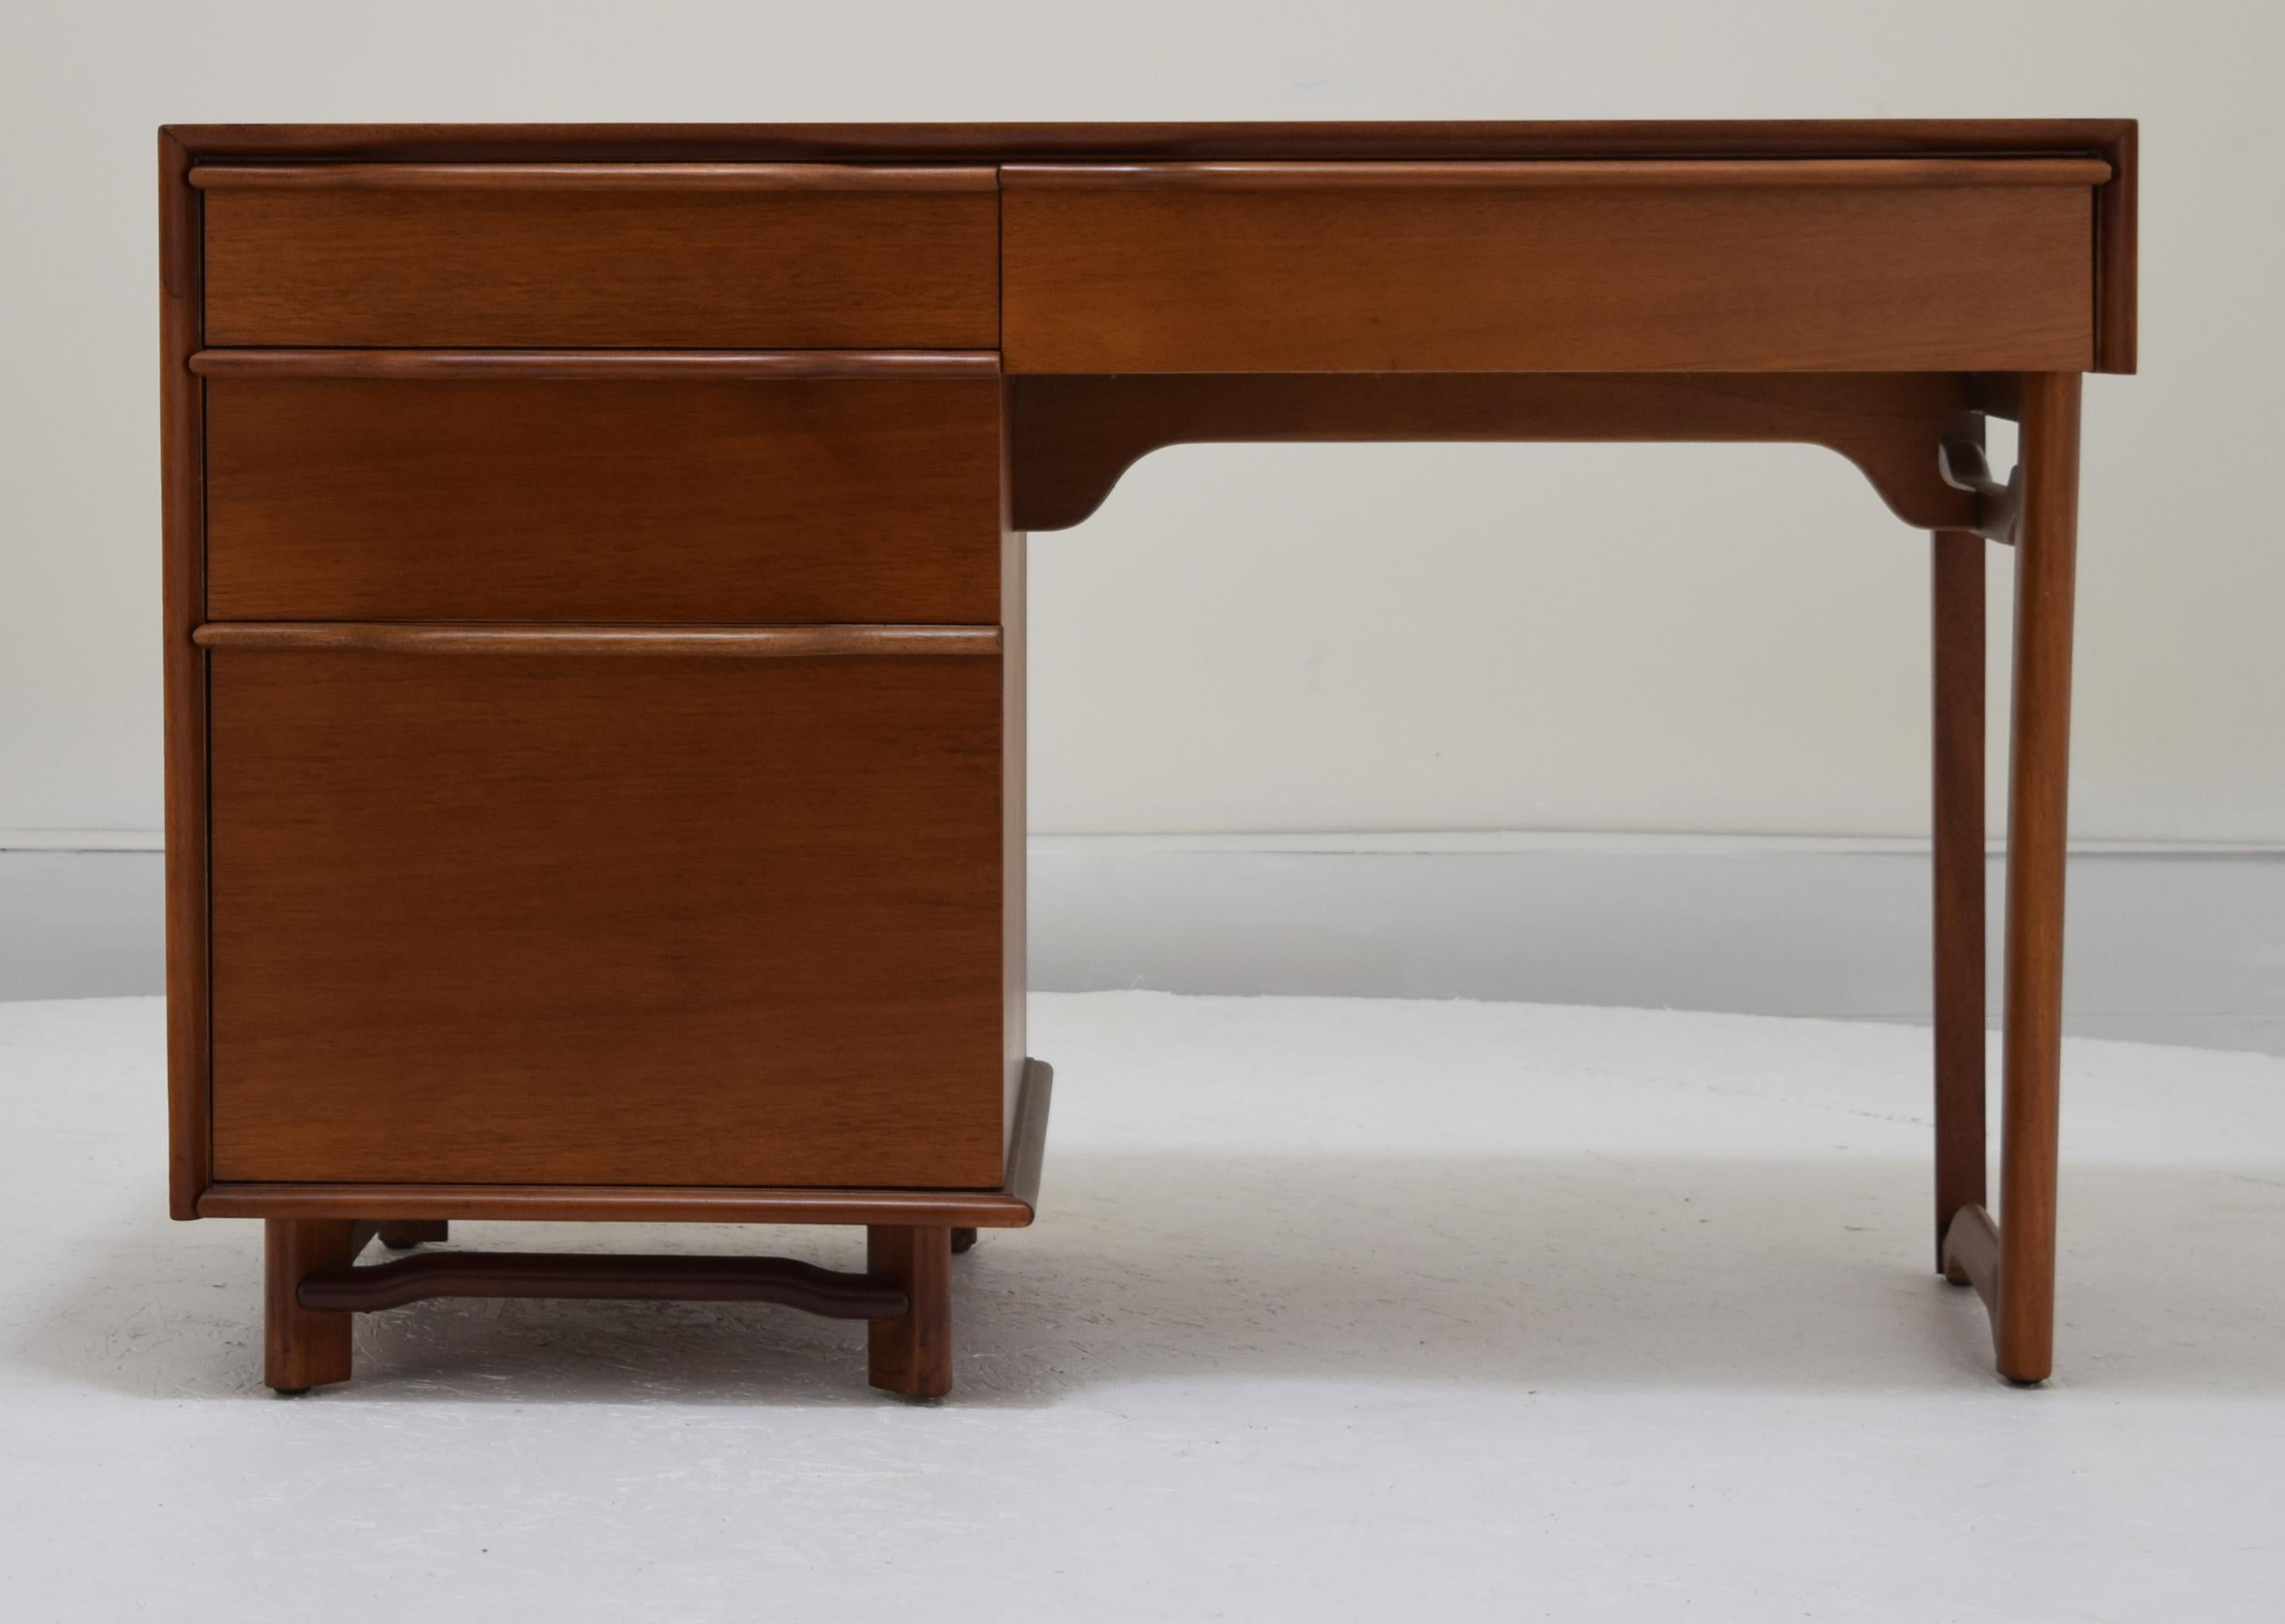 1952 by Hickory Manufacturing, Single Pedestal Vanity desk in all-mahogany. Measures 29.5